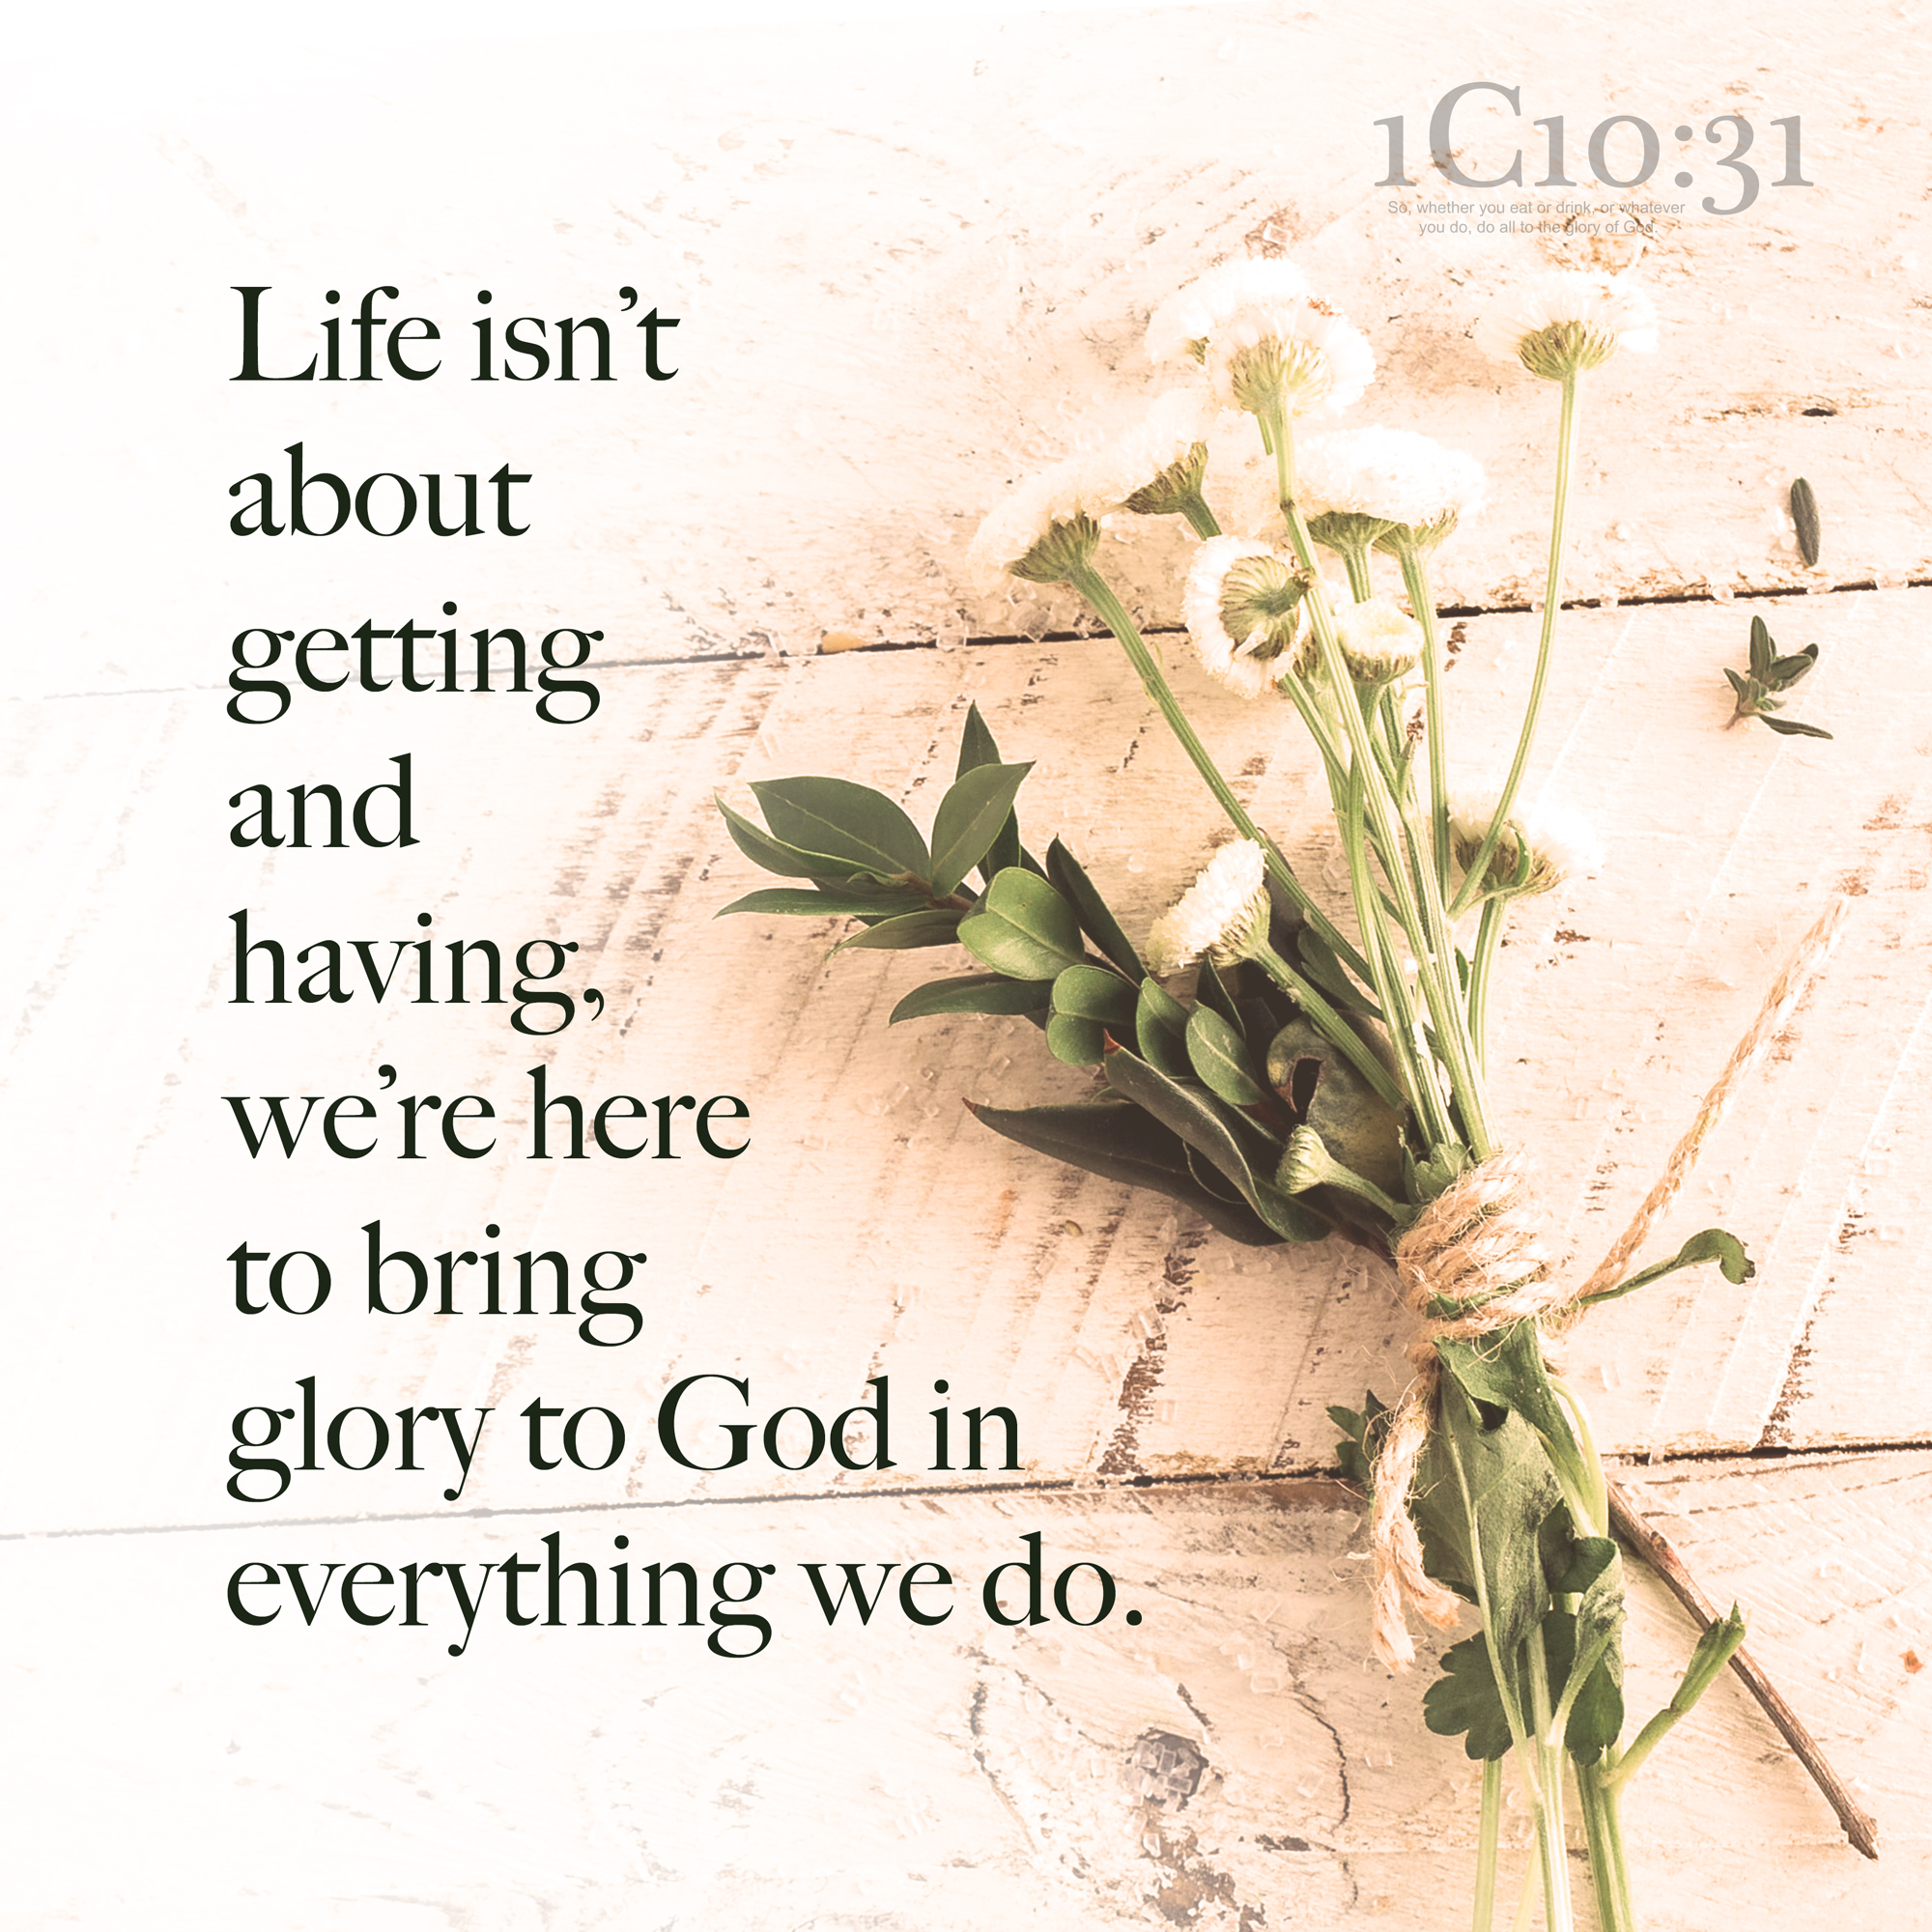 Life isn’t about getting and having, we’re hereto bring glory to God in everything we do. from 1C1031.co.zw